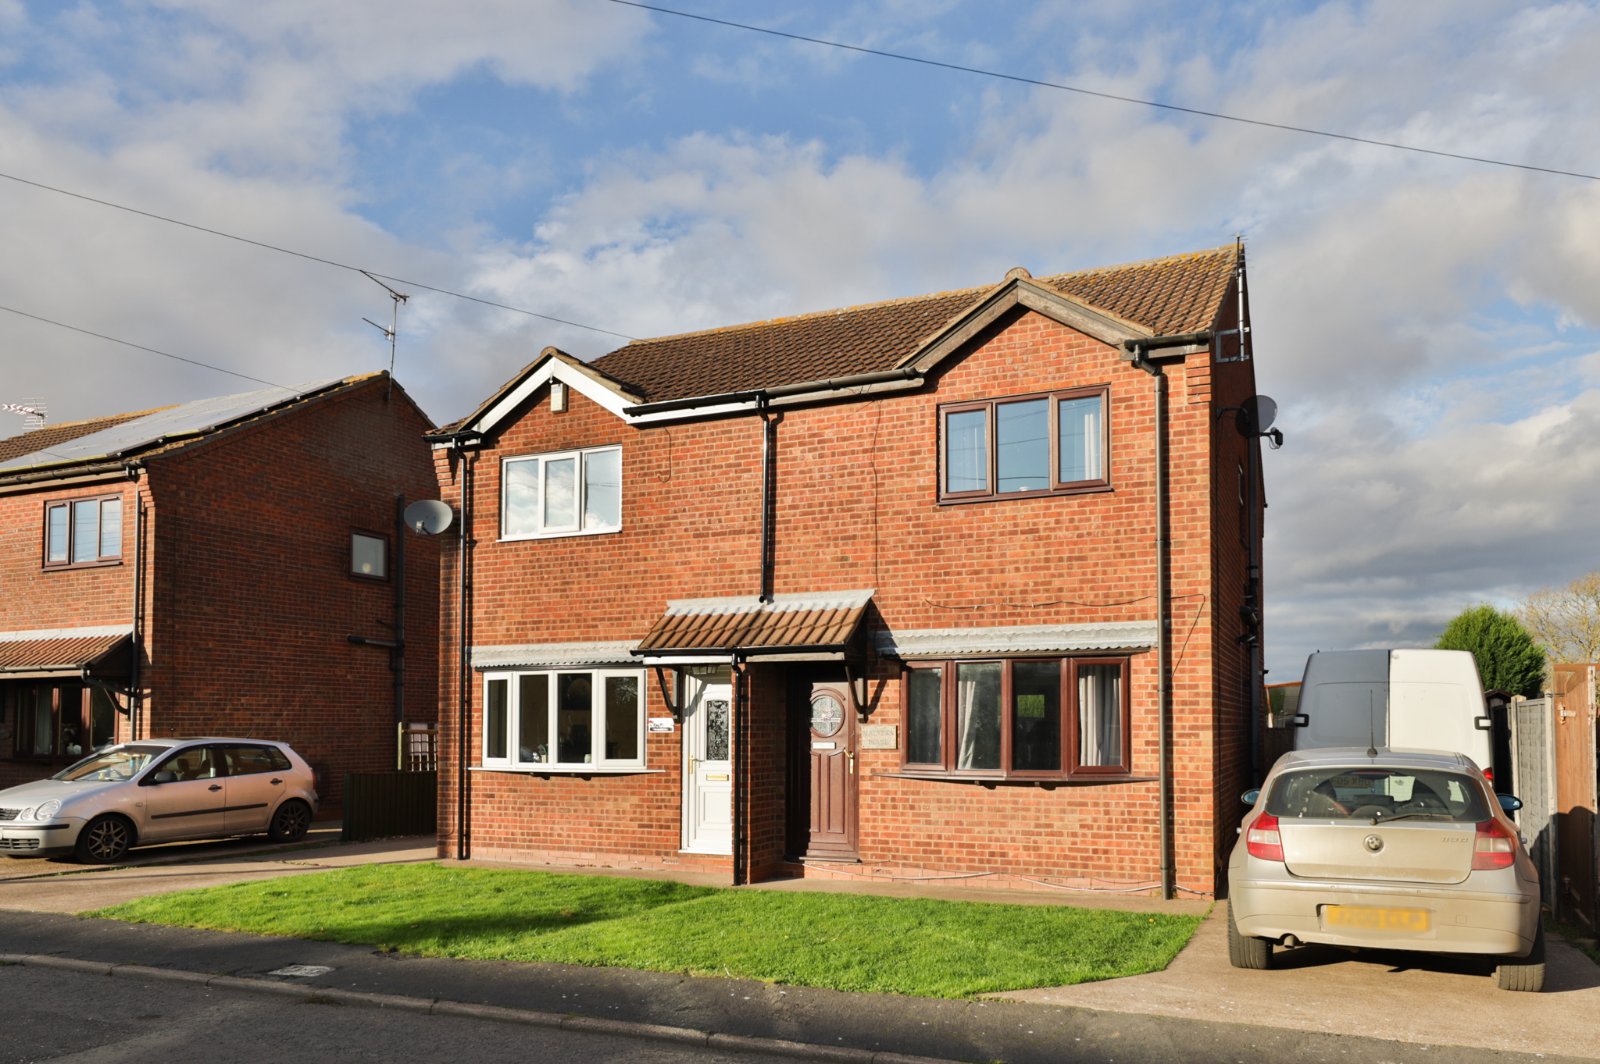 3 bed house for sale in Oxmarsh Lane, New Holland - Property Image 1